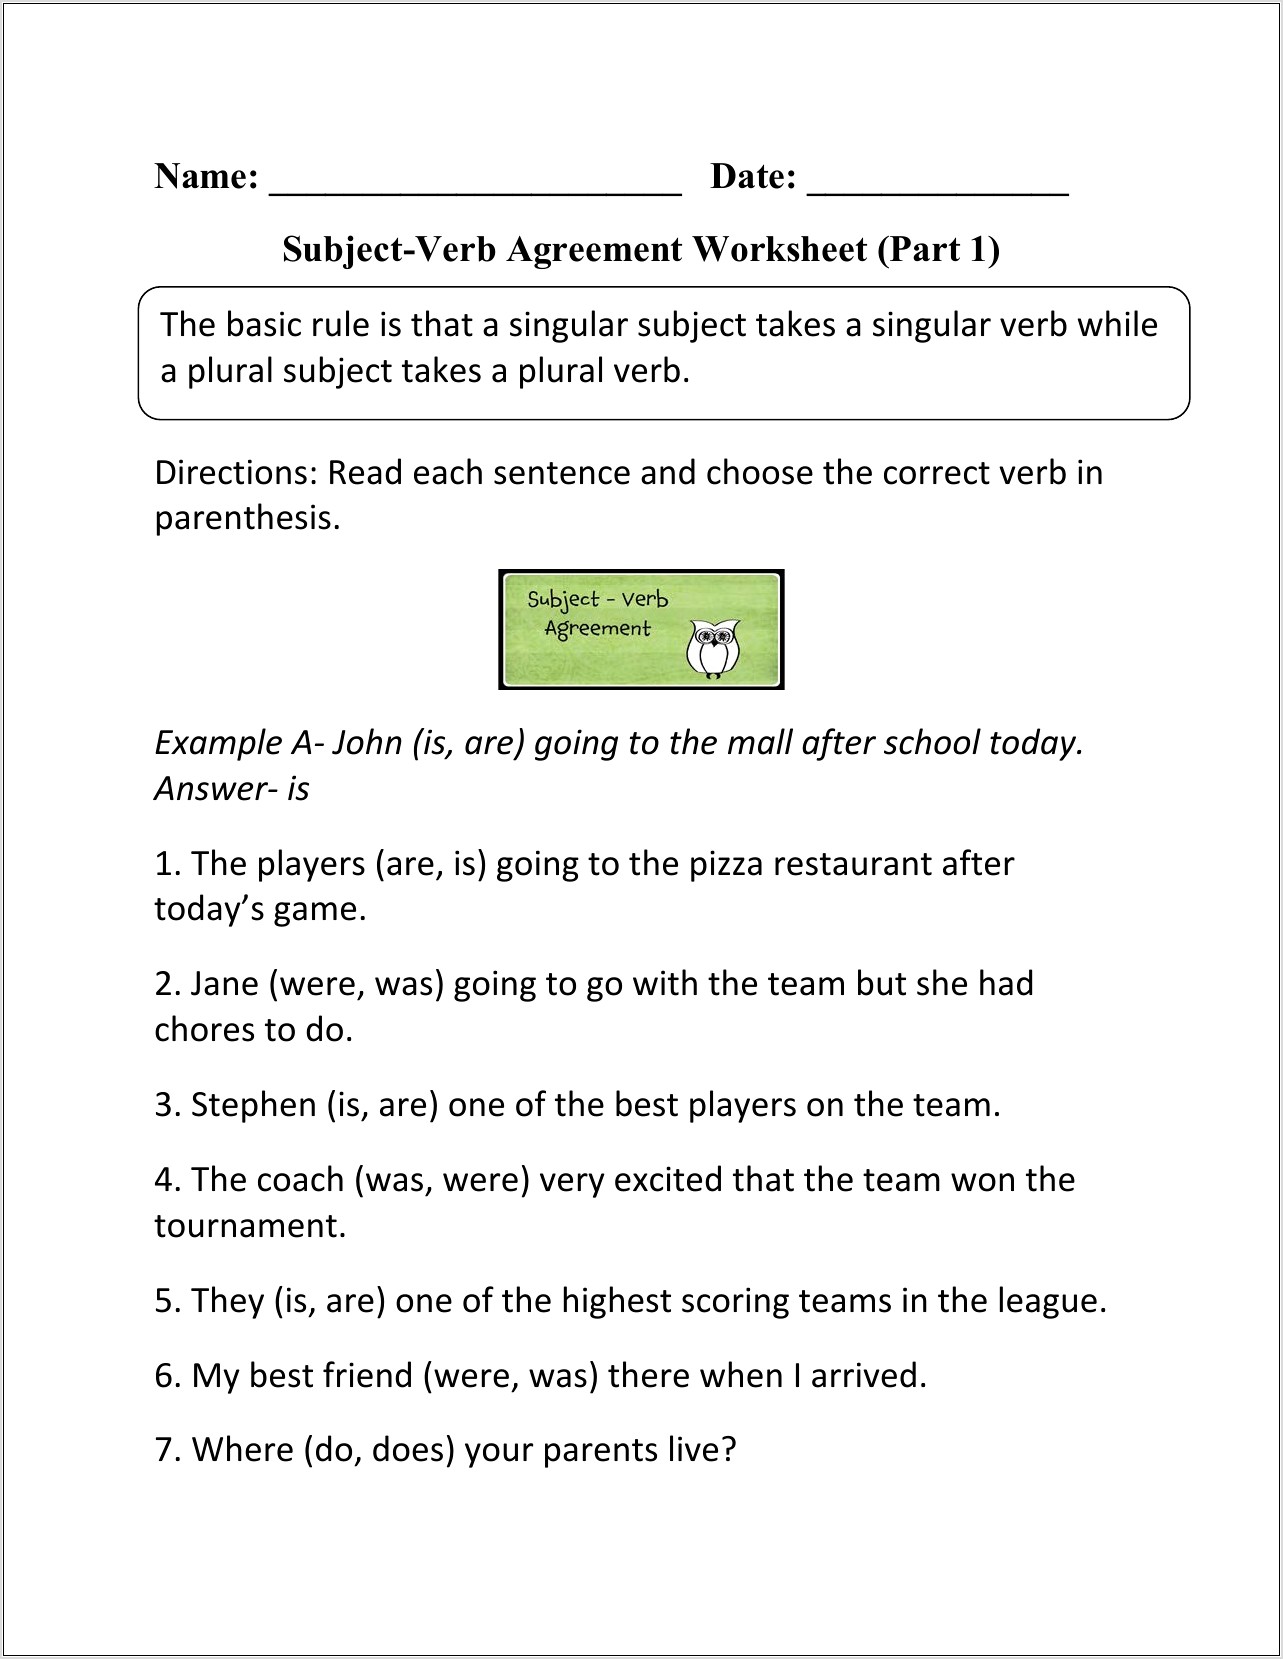 Worksheet On Subject Verb Agreement With Answers